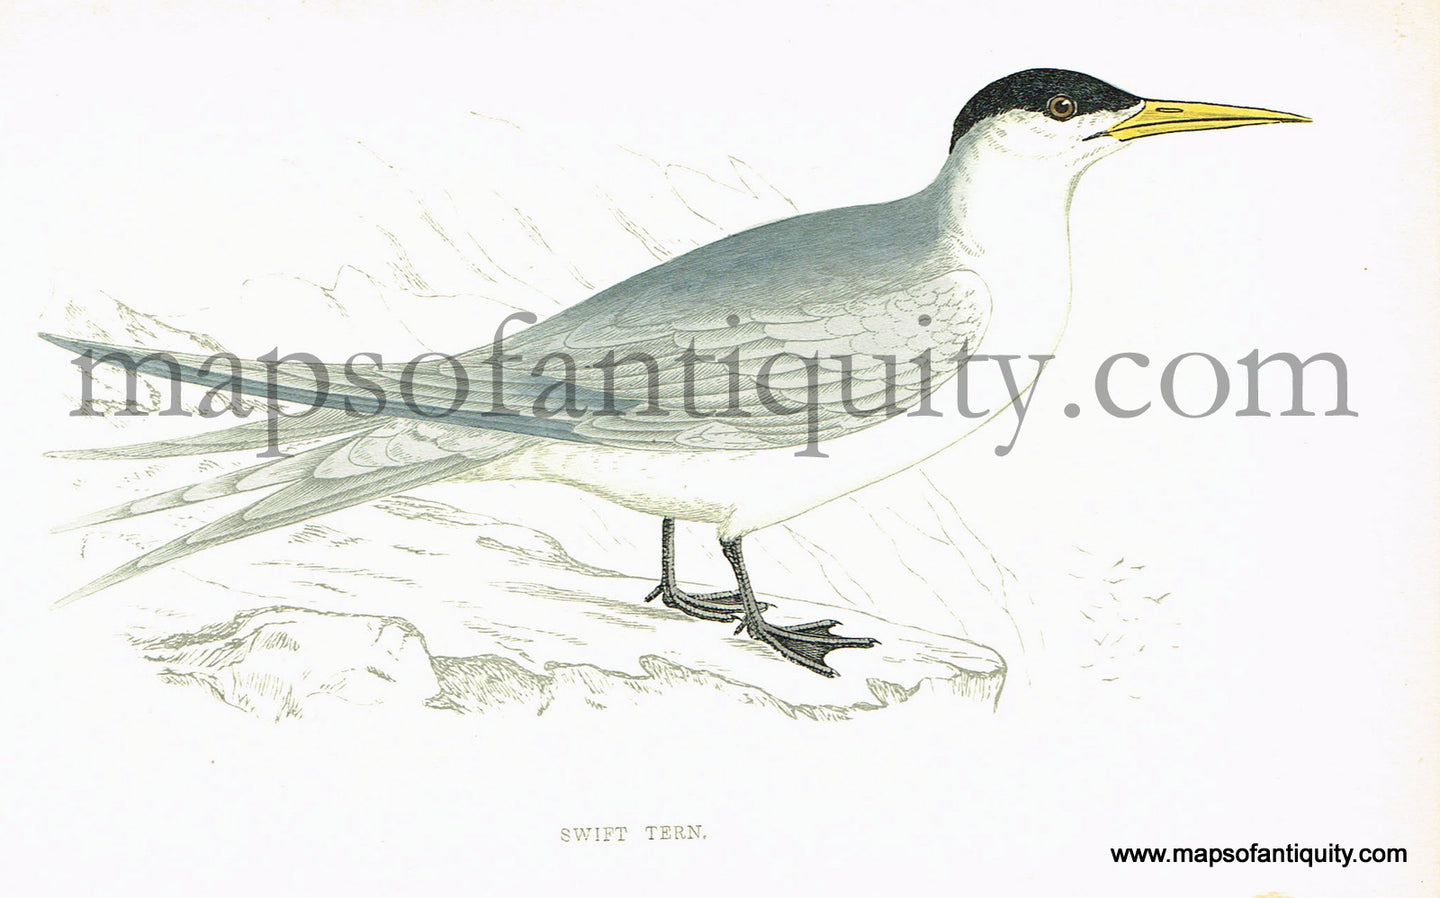 Antique-Hand-Colored-Engraved-Illustration-Swift-Tern-Antique-Prints-Natural-History-Birds-1867-Morris-Maps-Of-Antiquity